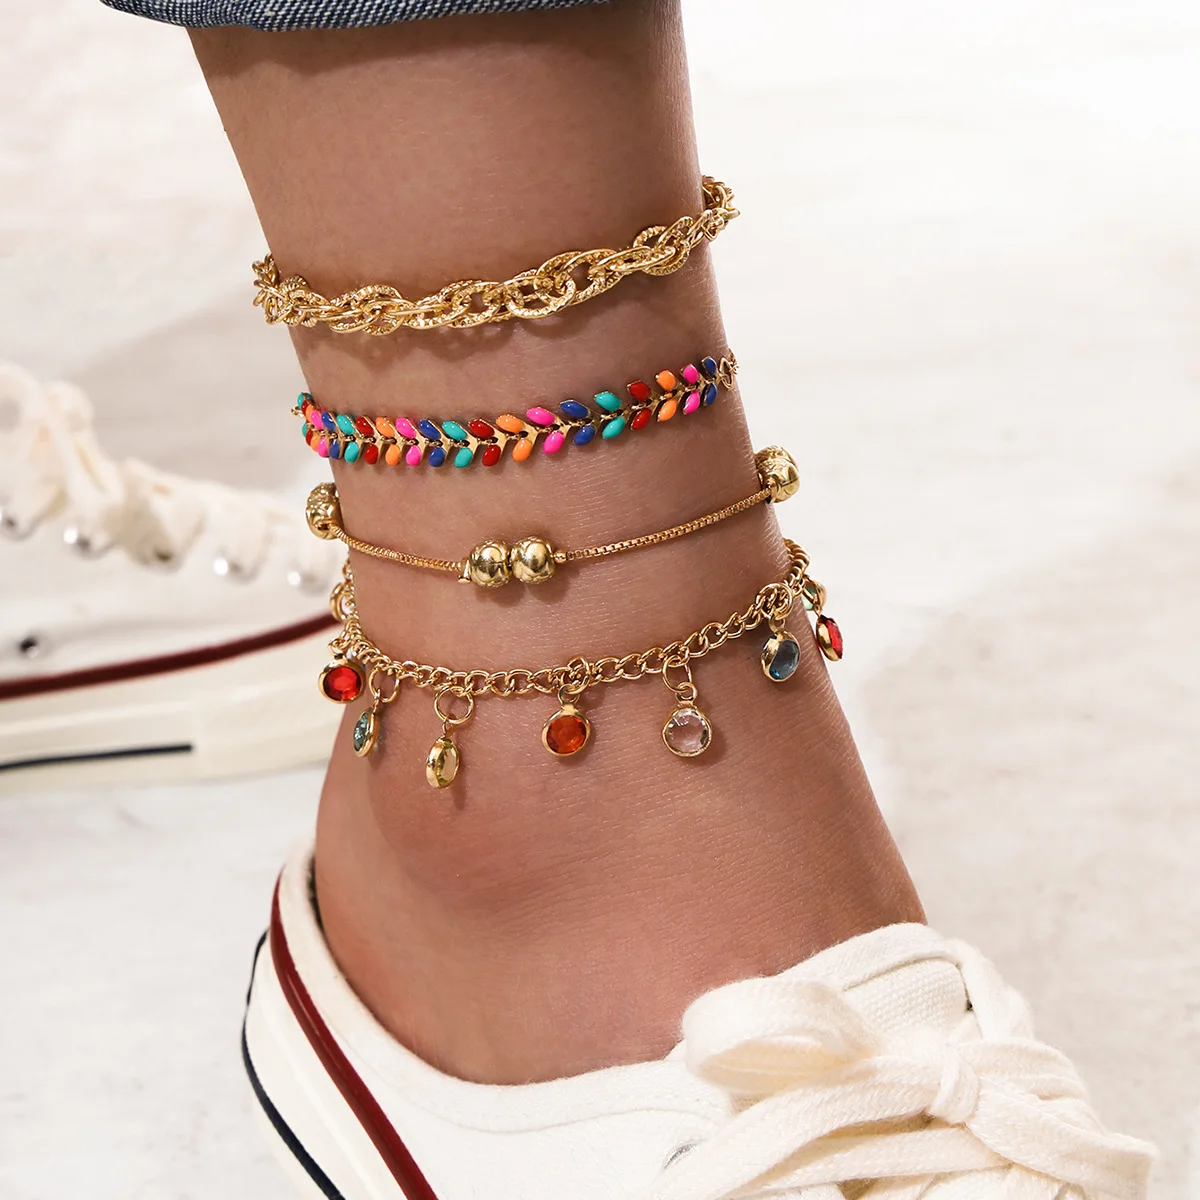 

Barlaycs 2021 Customize Women's Anklets Gold Plated Indian Jewelry Dainty Rainbow Channel Cuban Link Bunny Tassel Layered Anklet, Picture shows